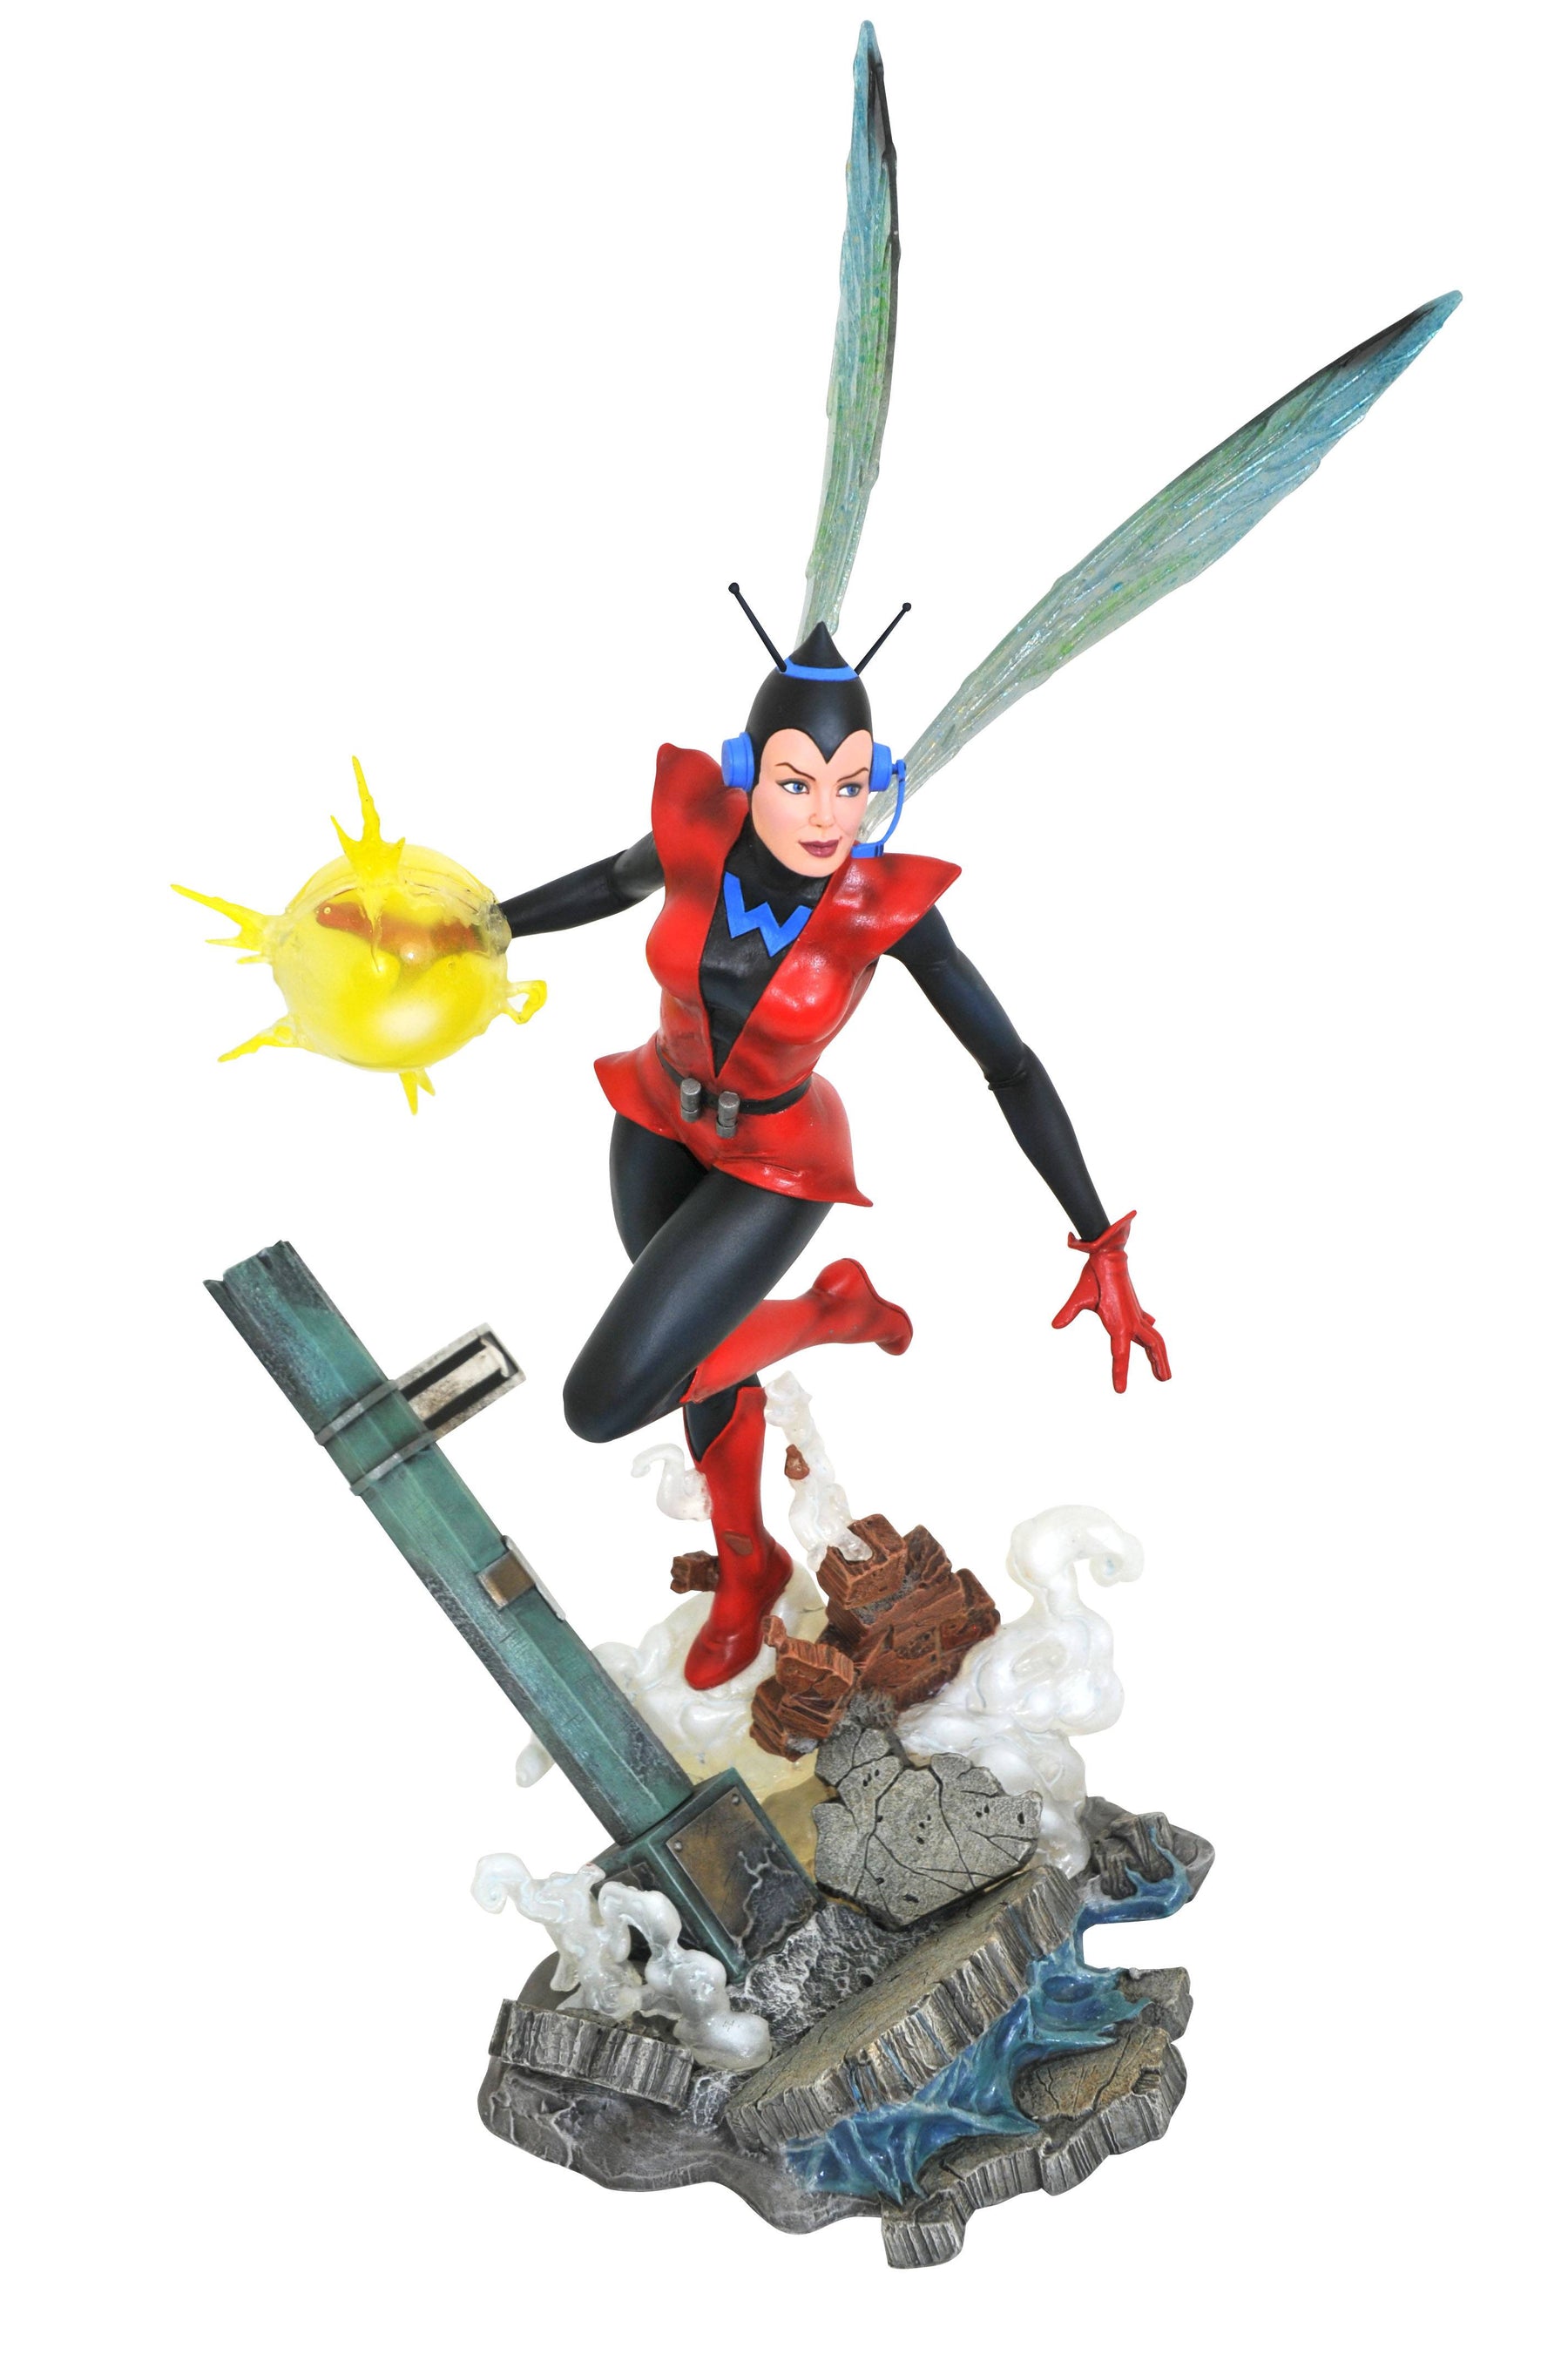 MARVEL GALLERY COMIC WASP PVC STATUE (C: 1-1-0)